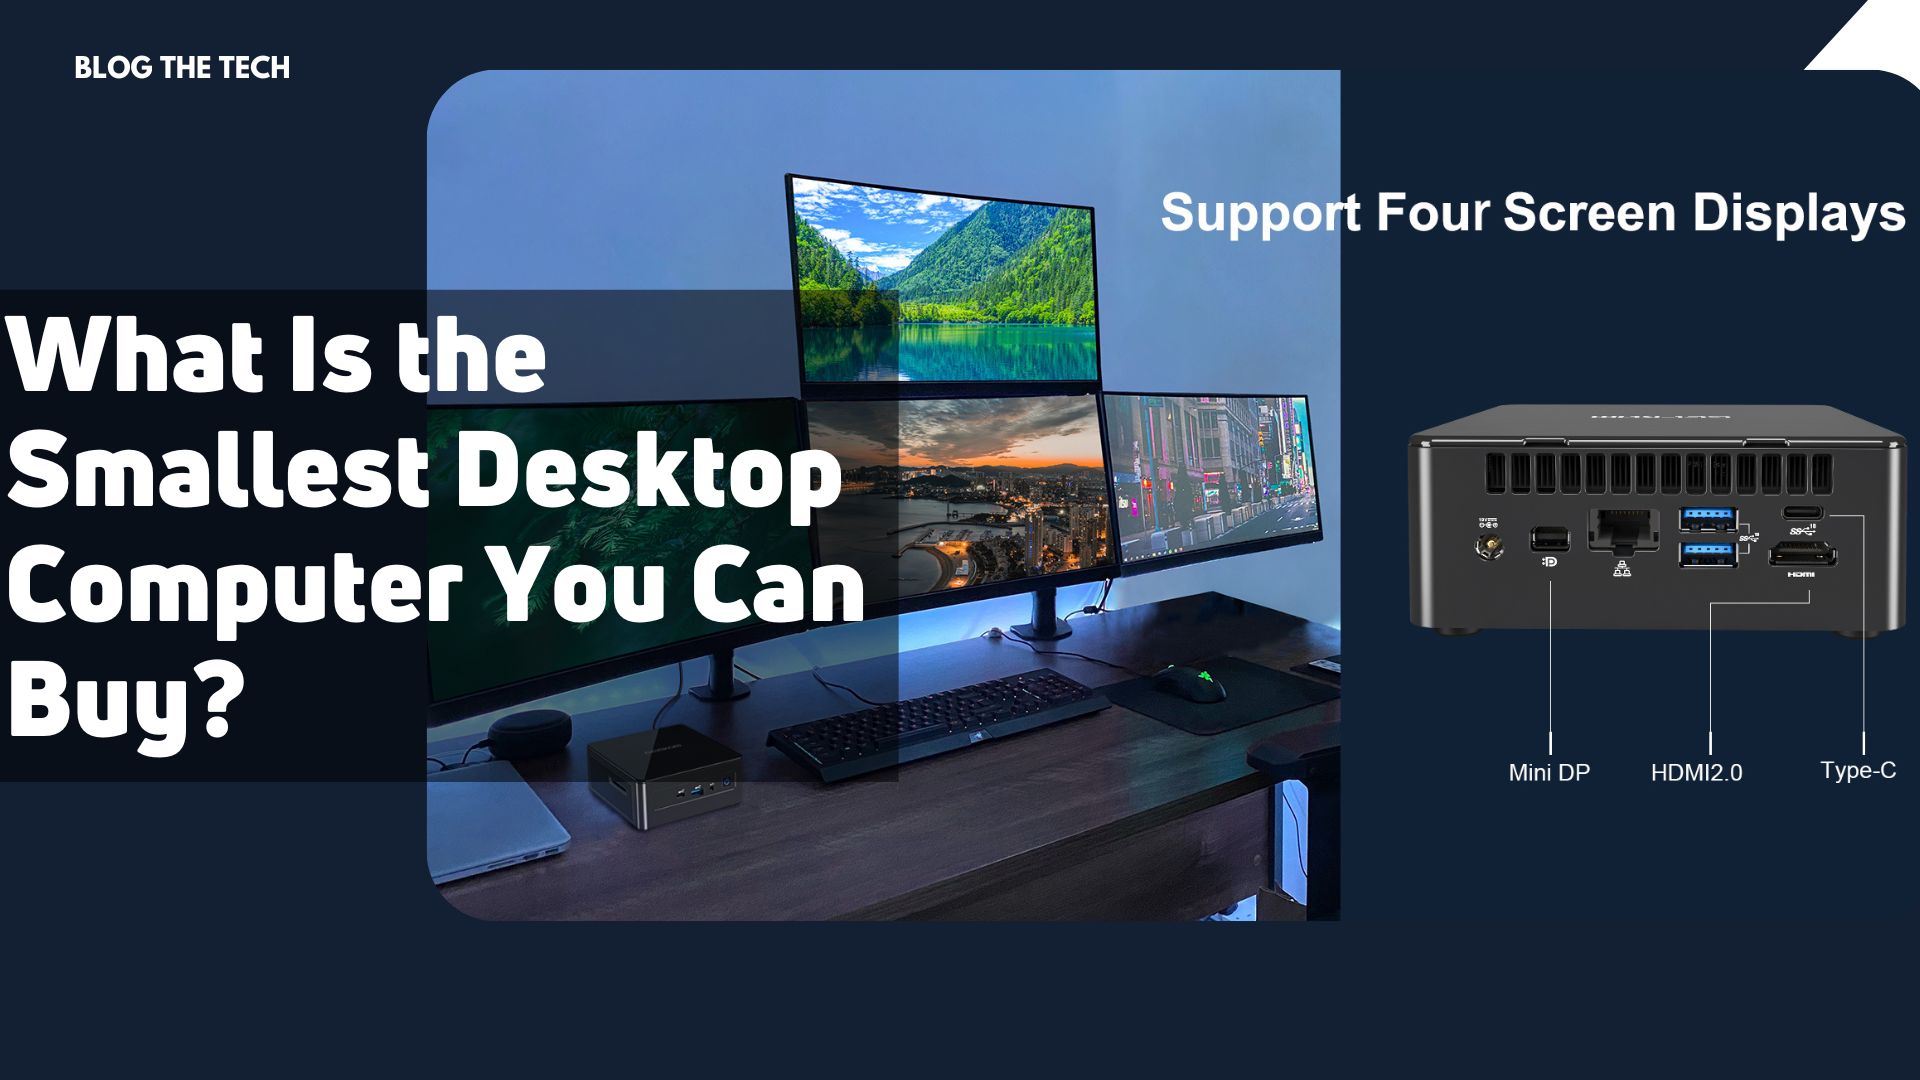 What Is the Smallest Desktop Computer You Can Buy?